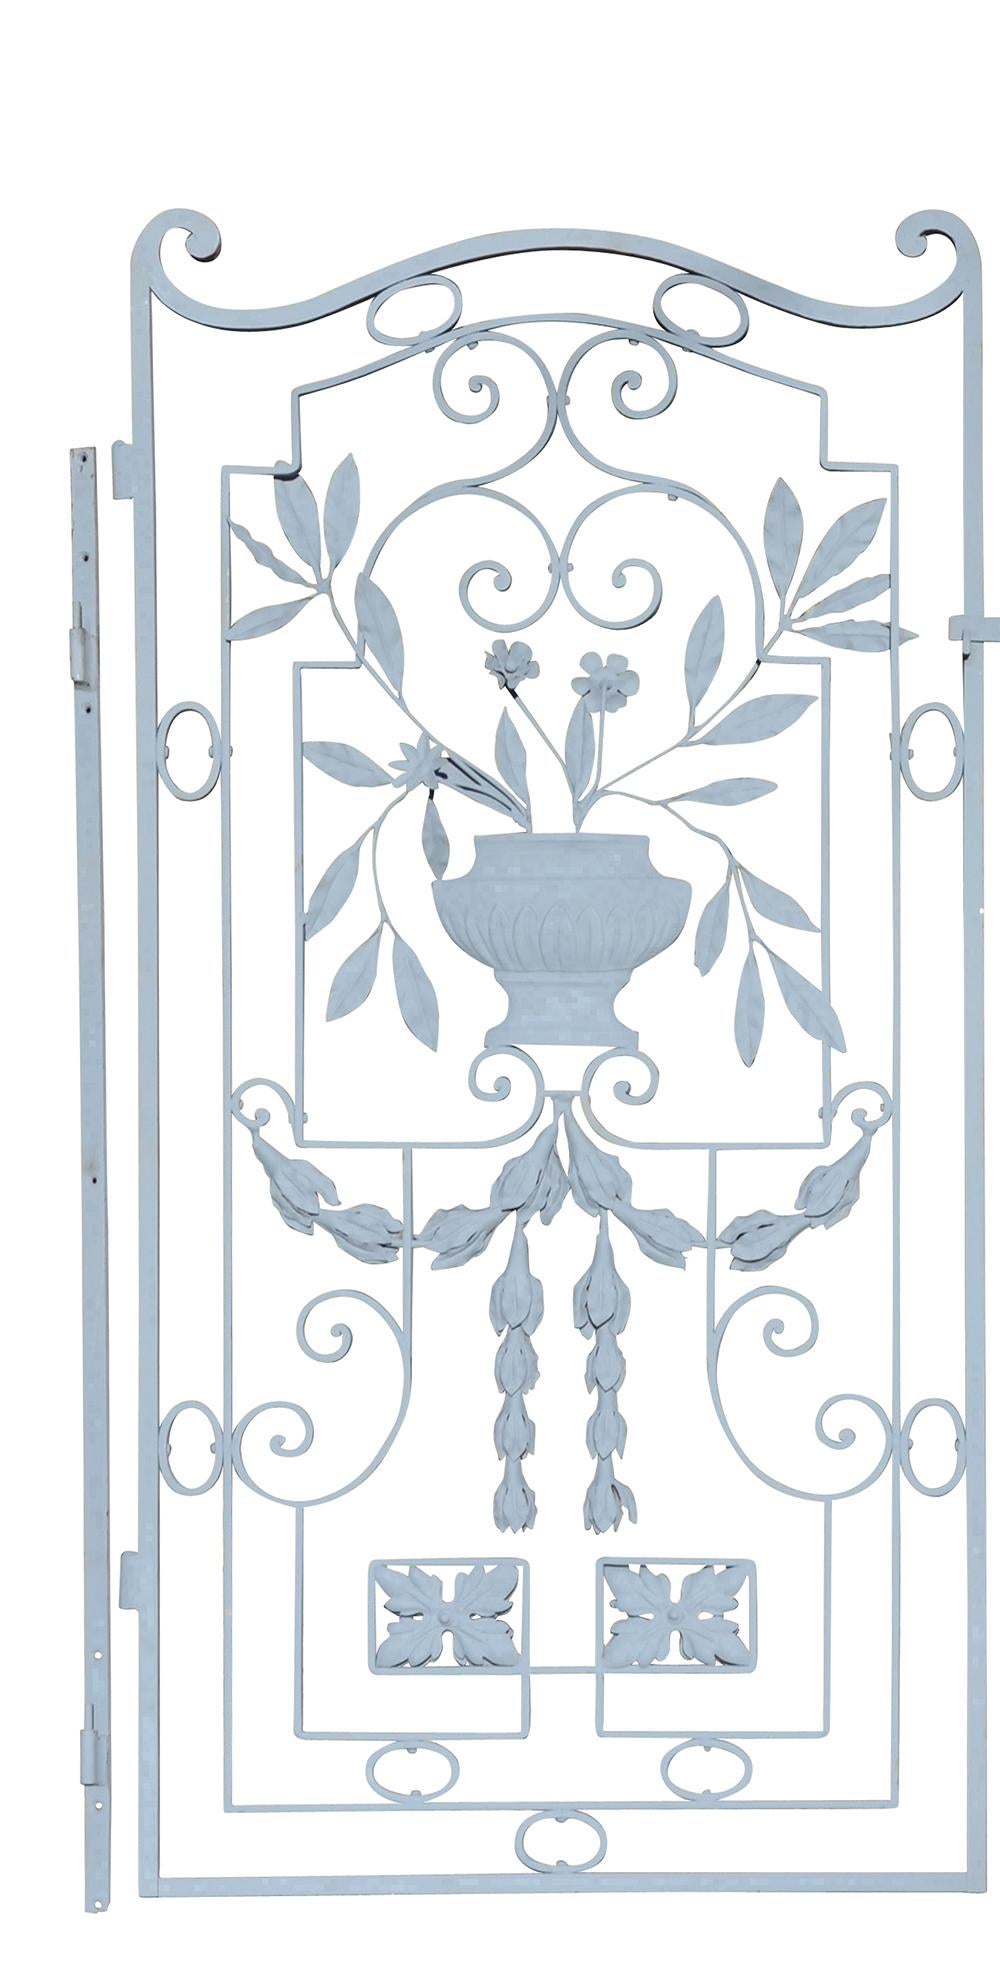 A pair of French iron and toll work garden gates having scroll work embellished with toll work swags and urn with flowers and foliage.